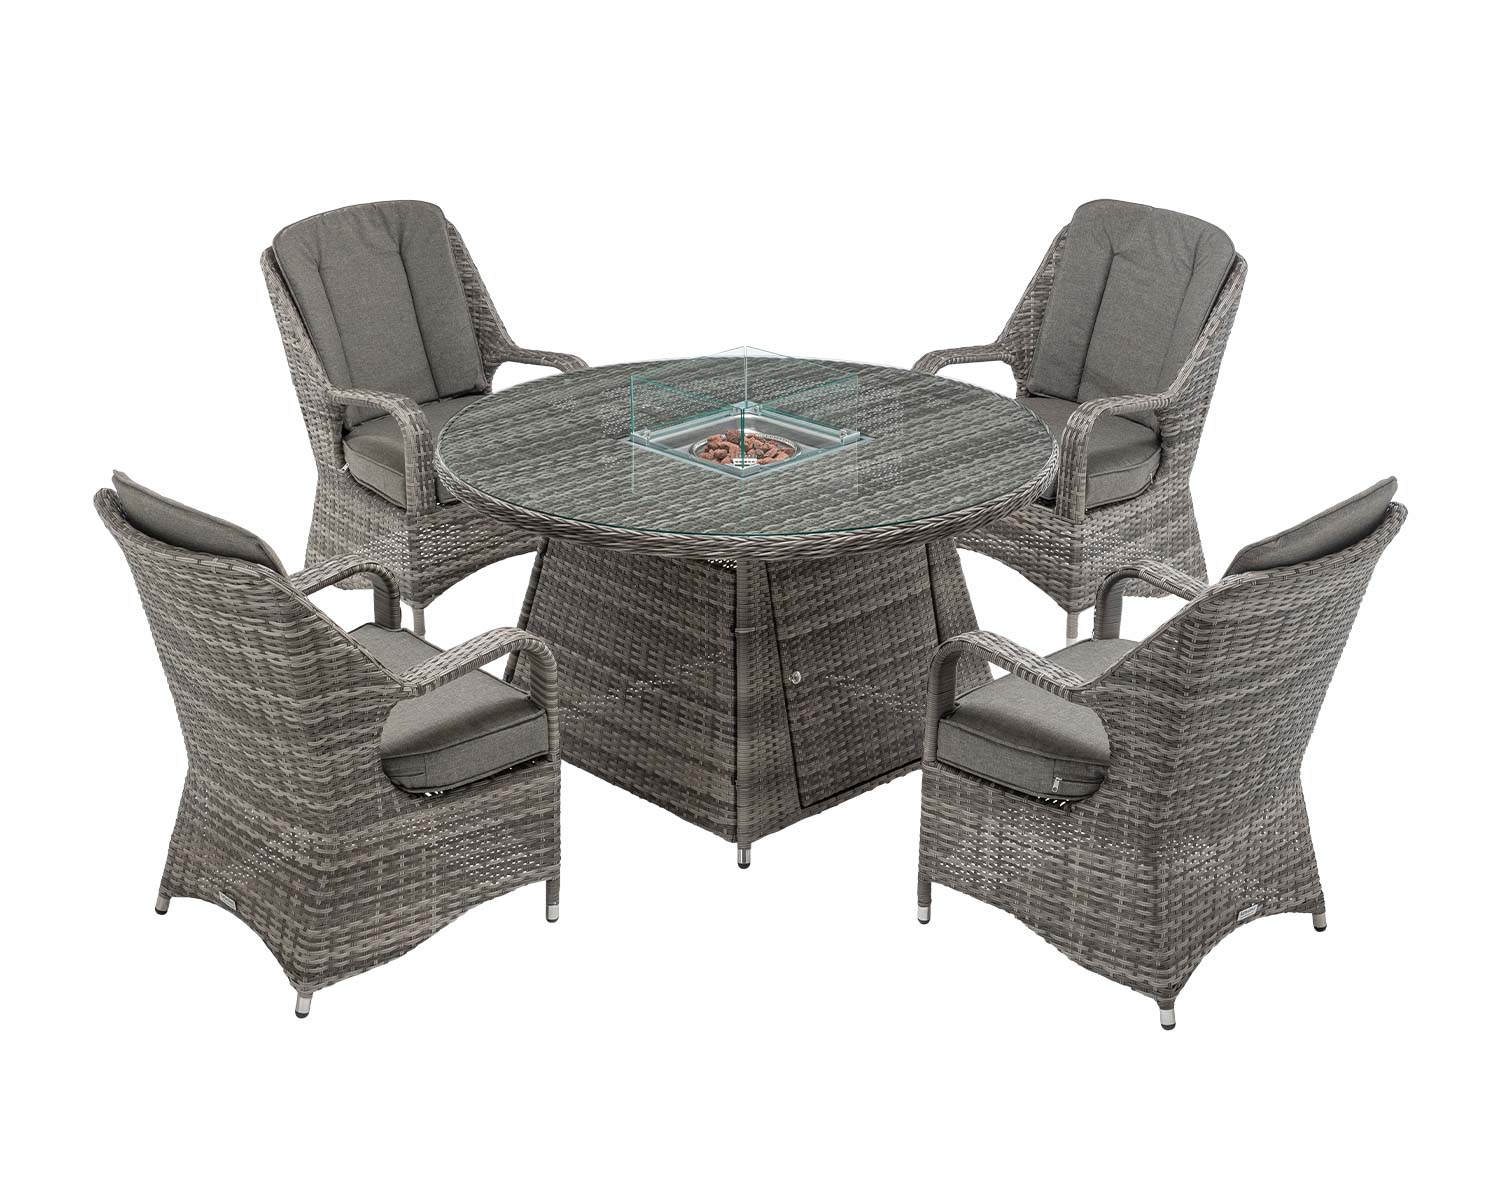 4 Seat Rattan Garden Dining Set With Round Table In Grey With Fire Pit Marseille Rattan Direct